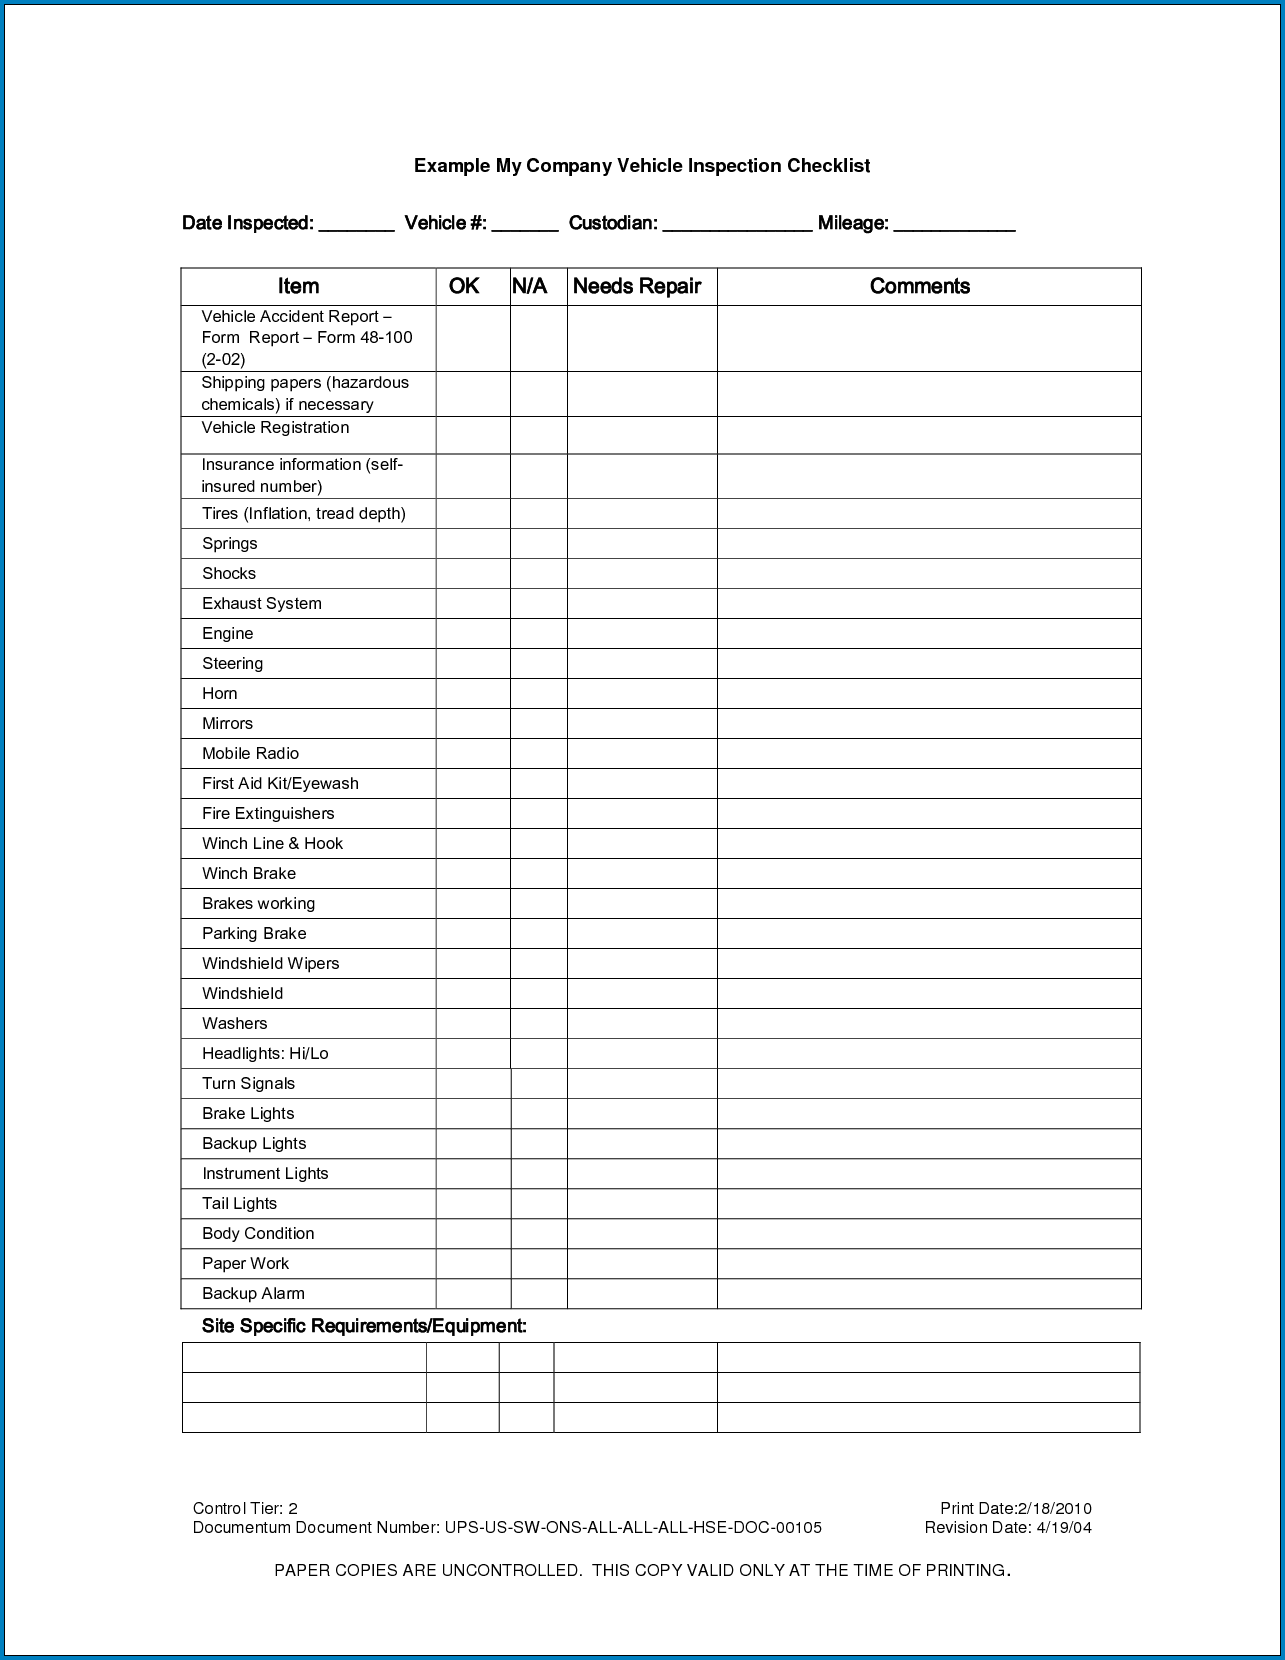 Sample of Company Vehicle Inspection Checklist Template